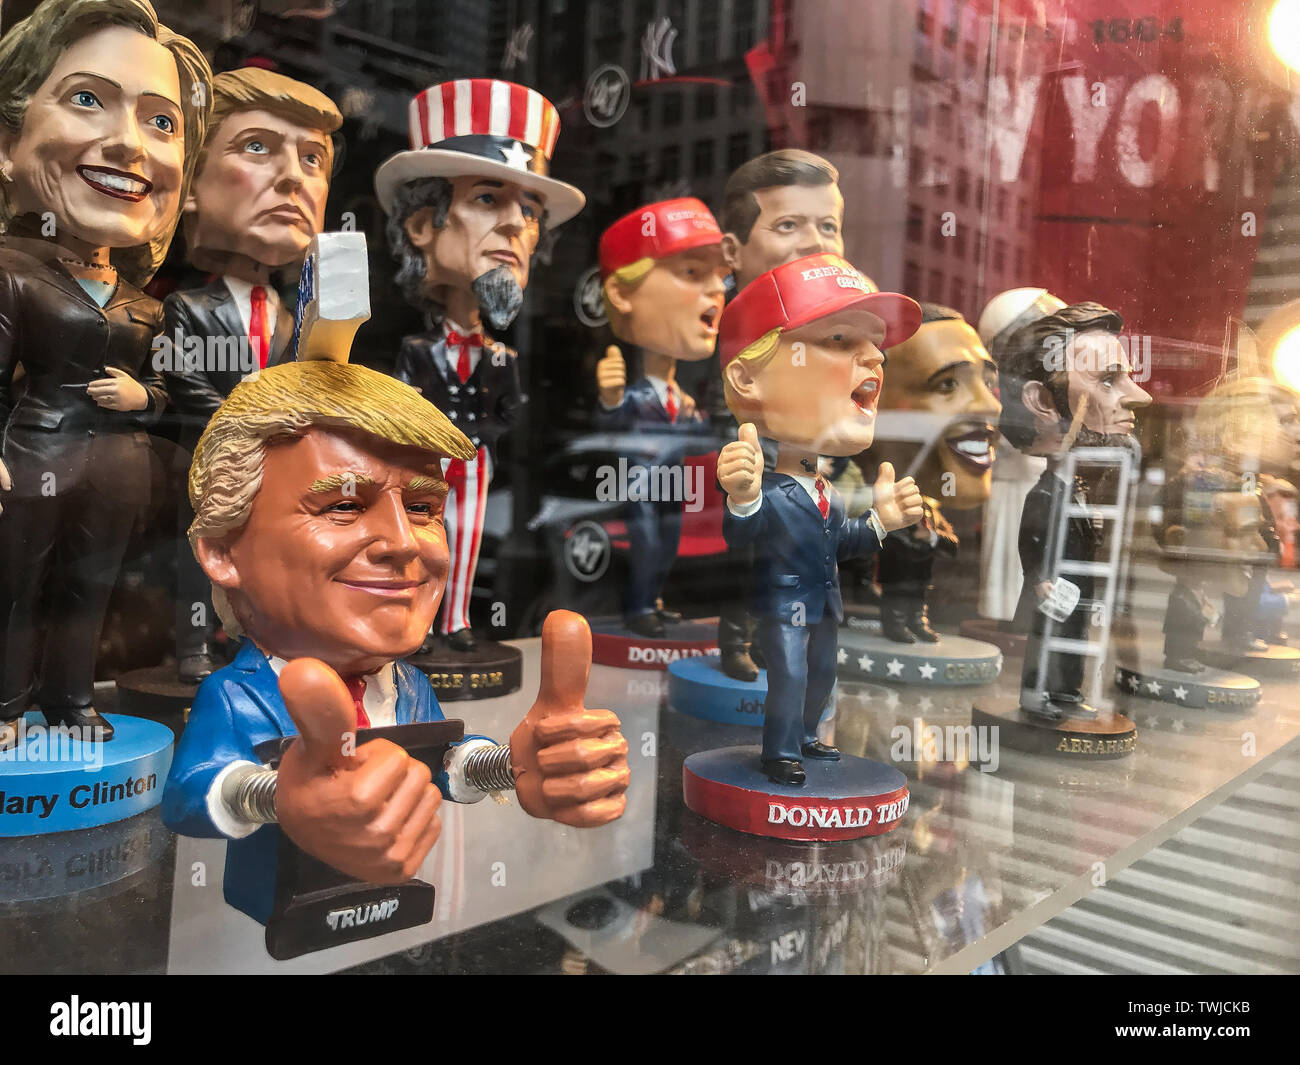 New York, 5/23/2019: Bobble head dolls of various political figures are seen on a gift shop's window display. Stock Photo